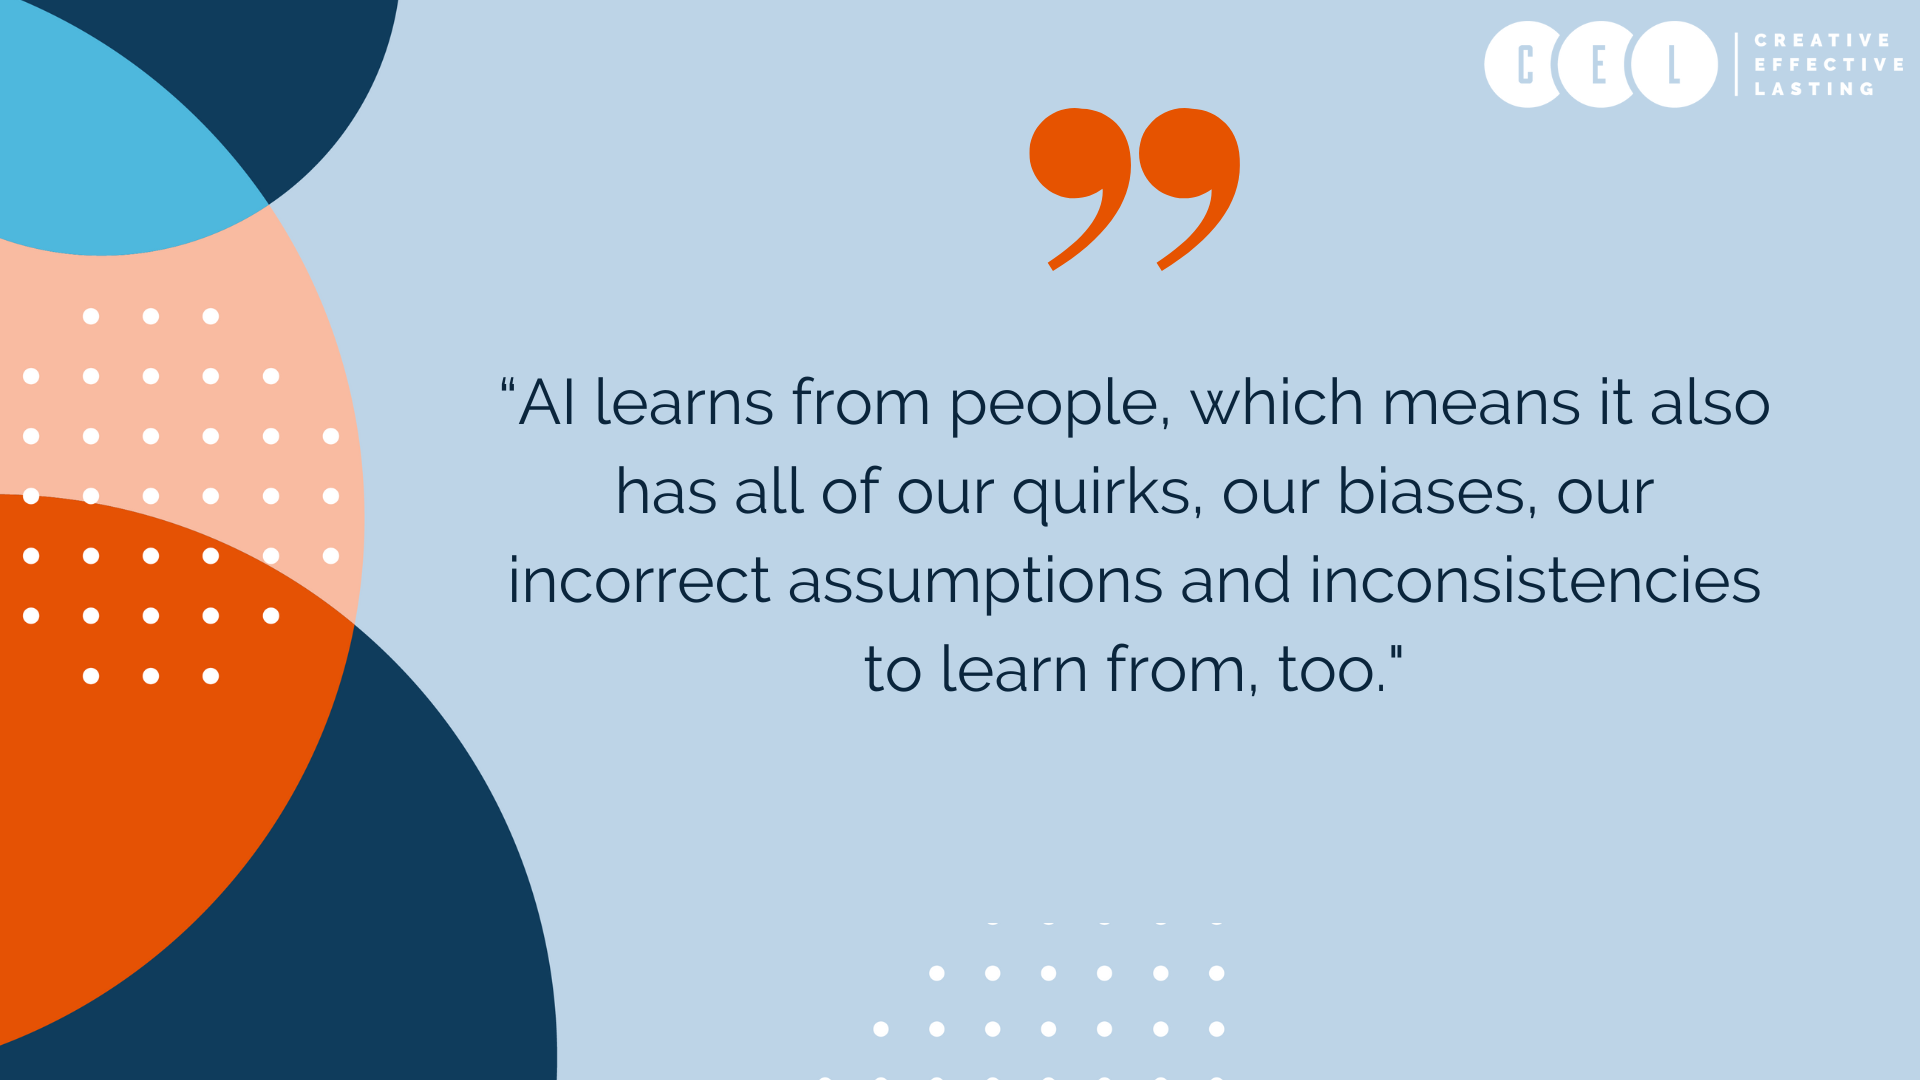 AI learns from people, which means it also has all of our quirks, our biases, our incorrect assumptions and inconsistencies to learn from, too.